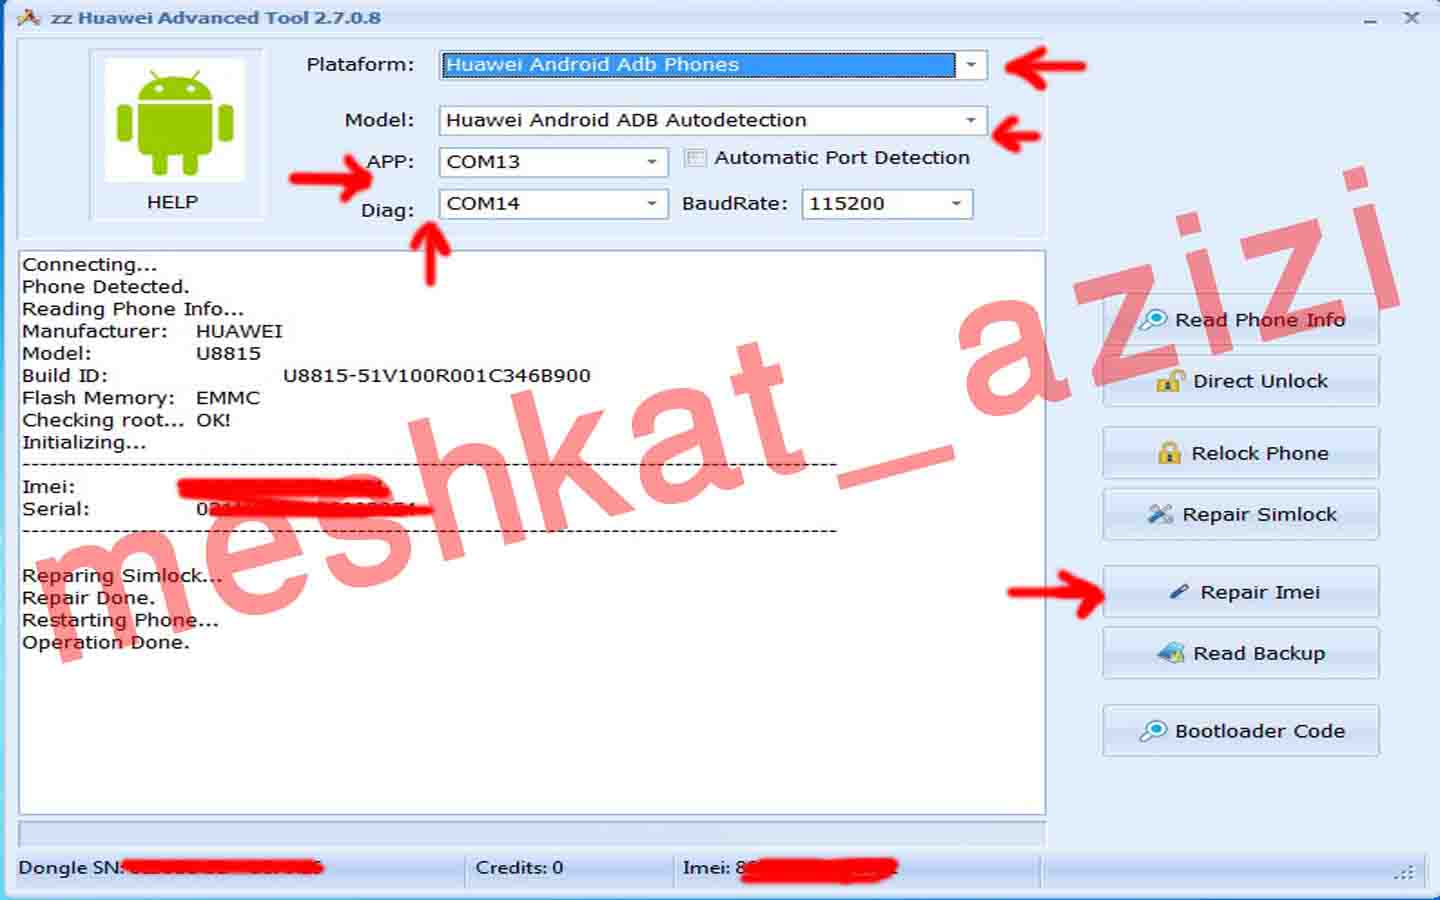  HUAWEI G300 repair imei&simlock done by Zzkey successfully Up920010